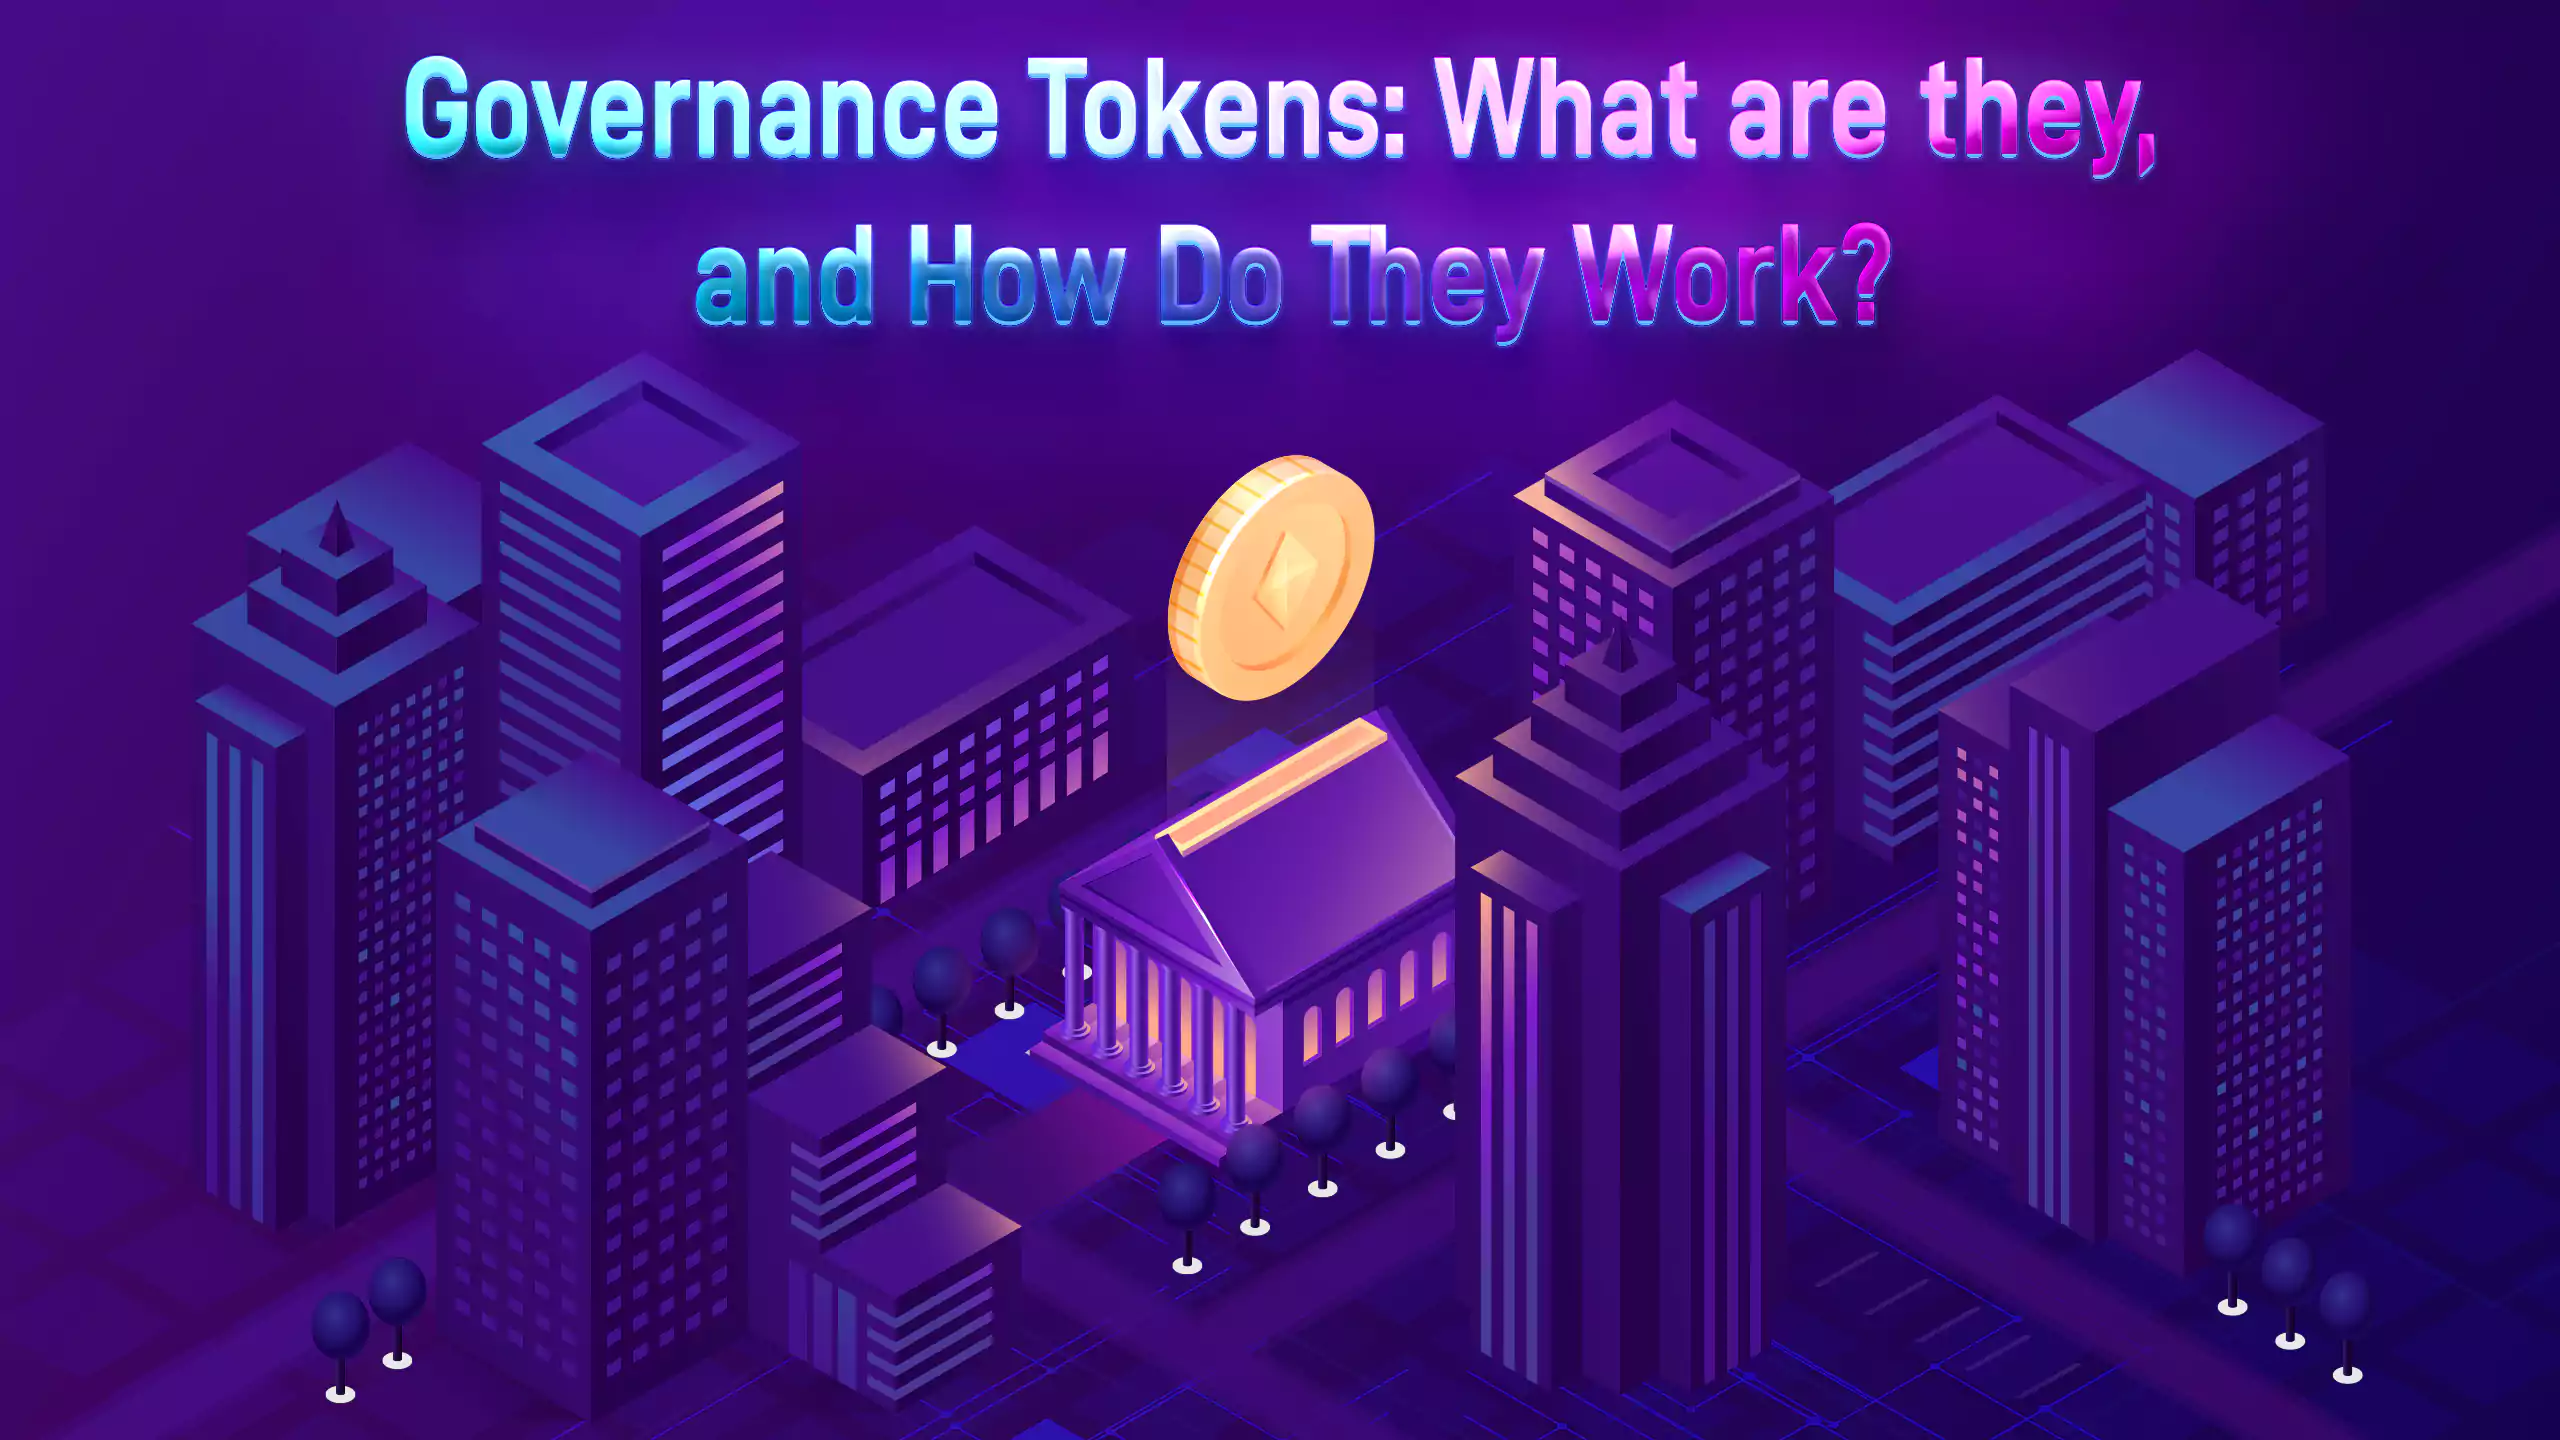 Governance tokens, how do they work?